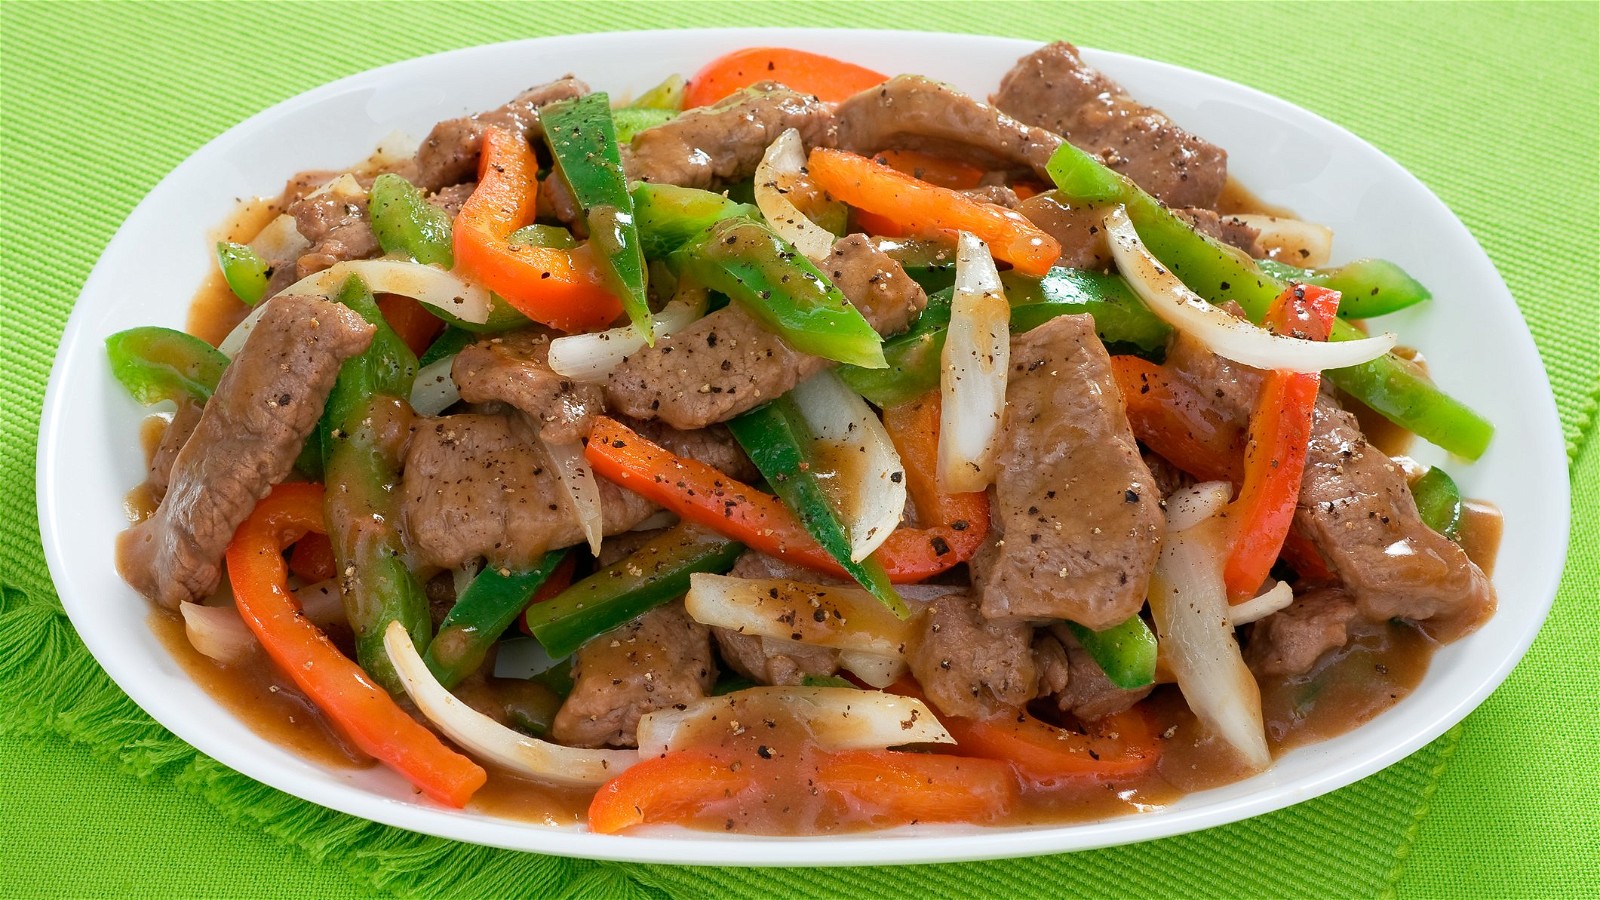 Image of STIR FRY BEEF and PEPPERS